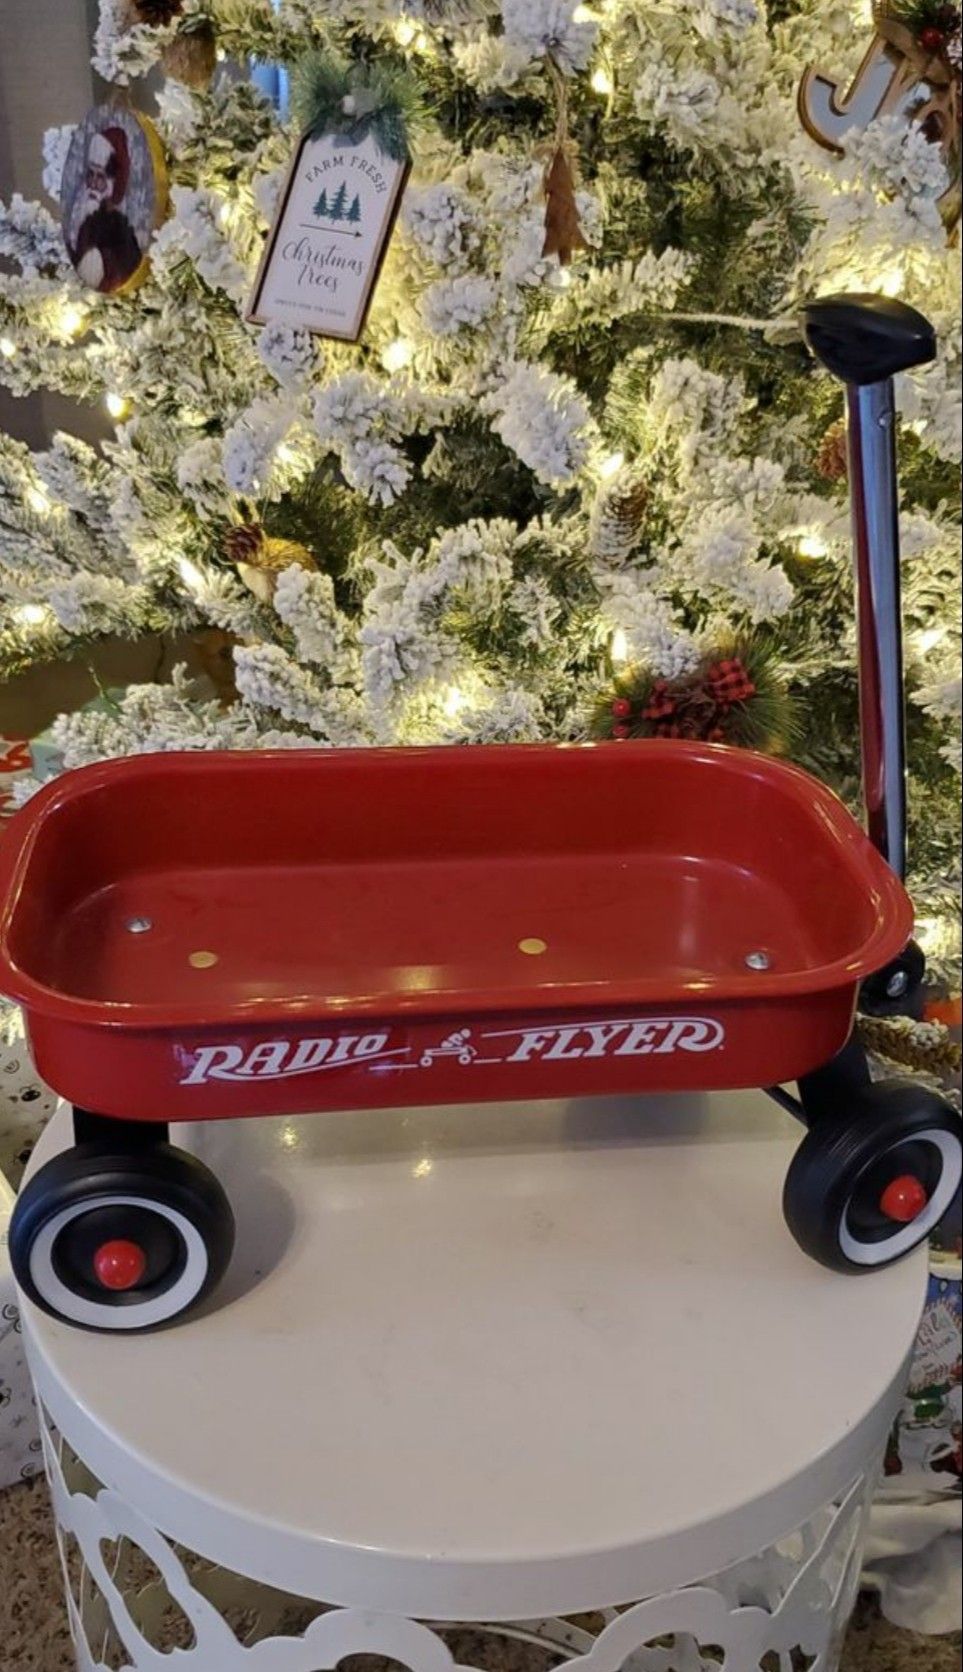 Small Toy Wagon